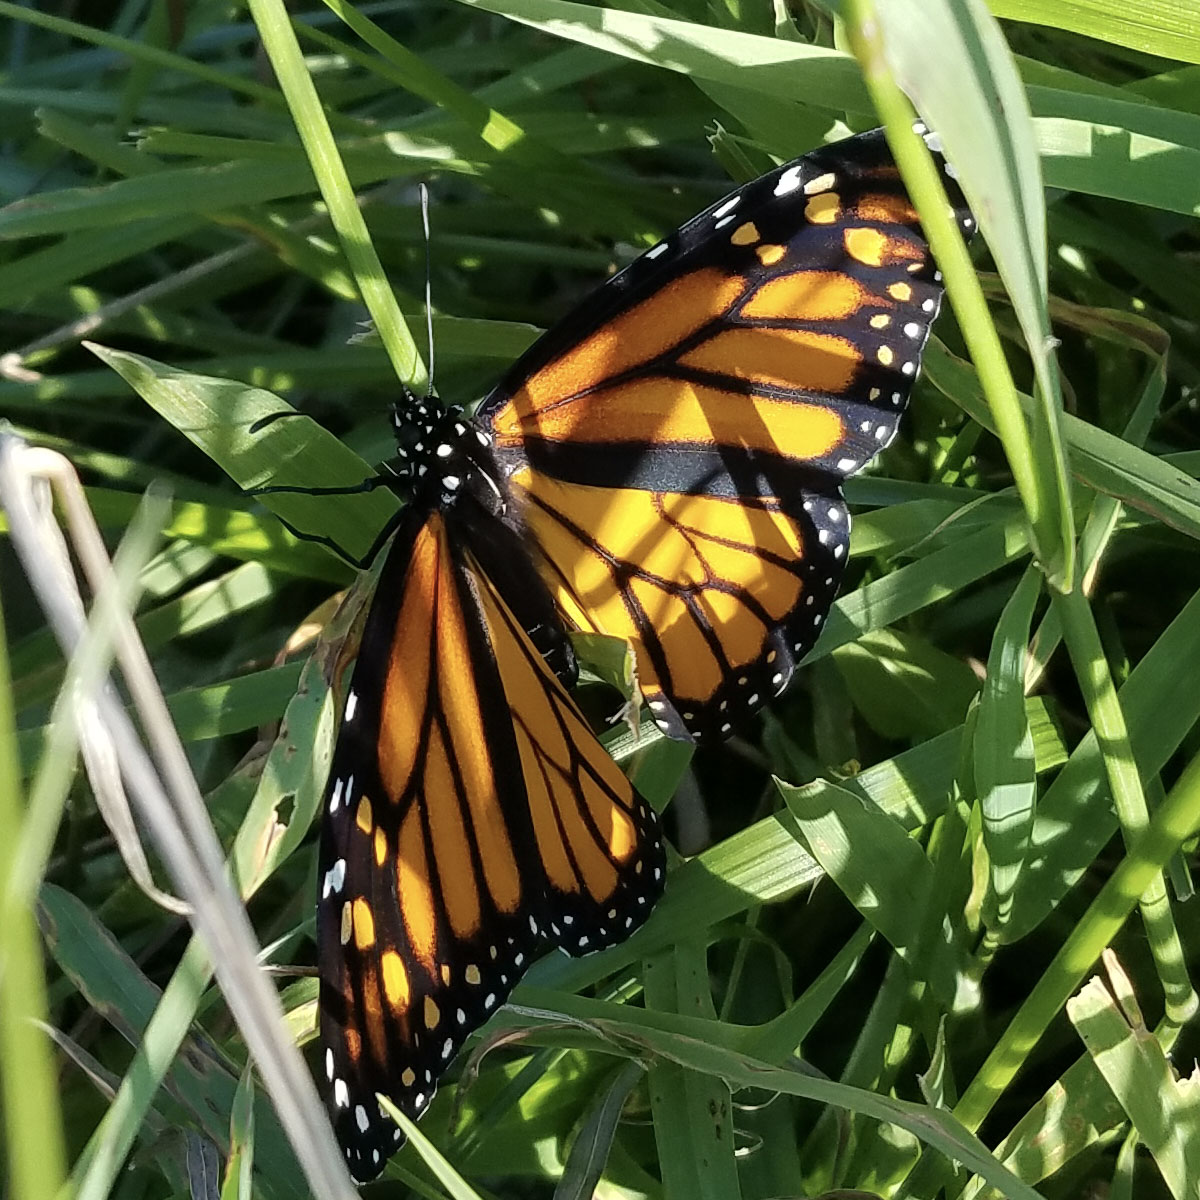 Farm Biodiversity and Monarch Butterfly